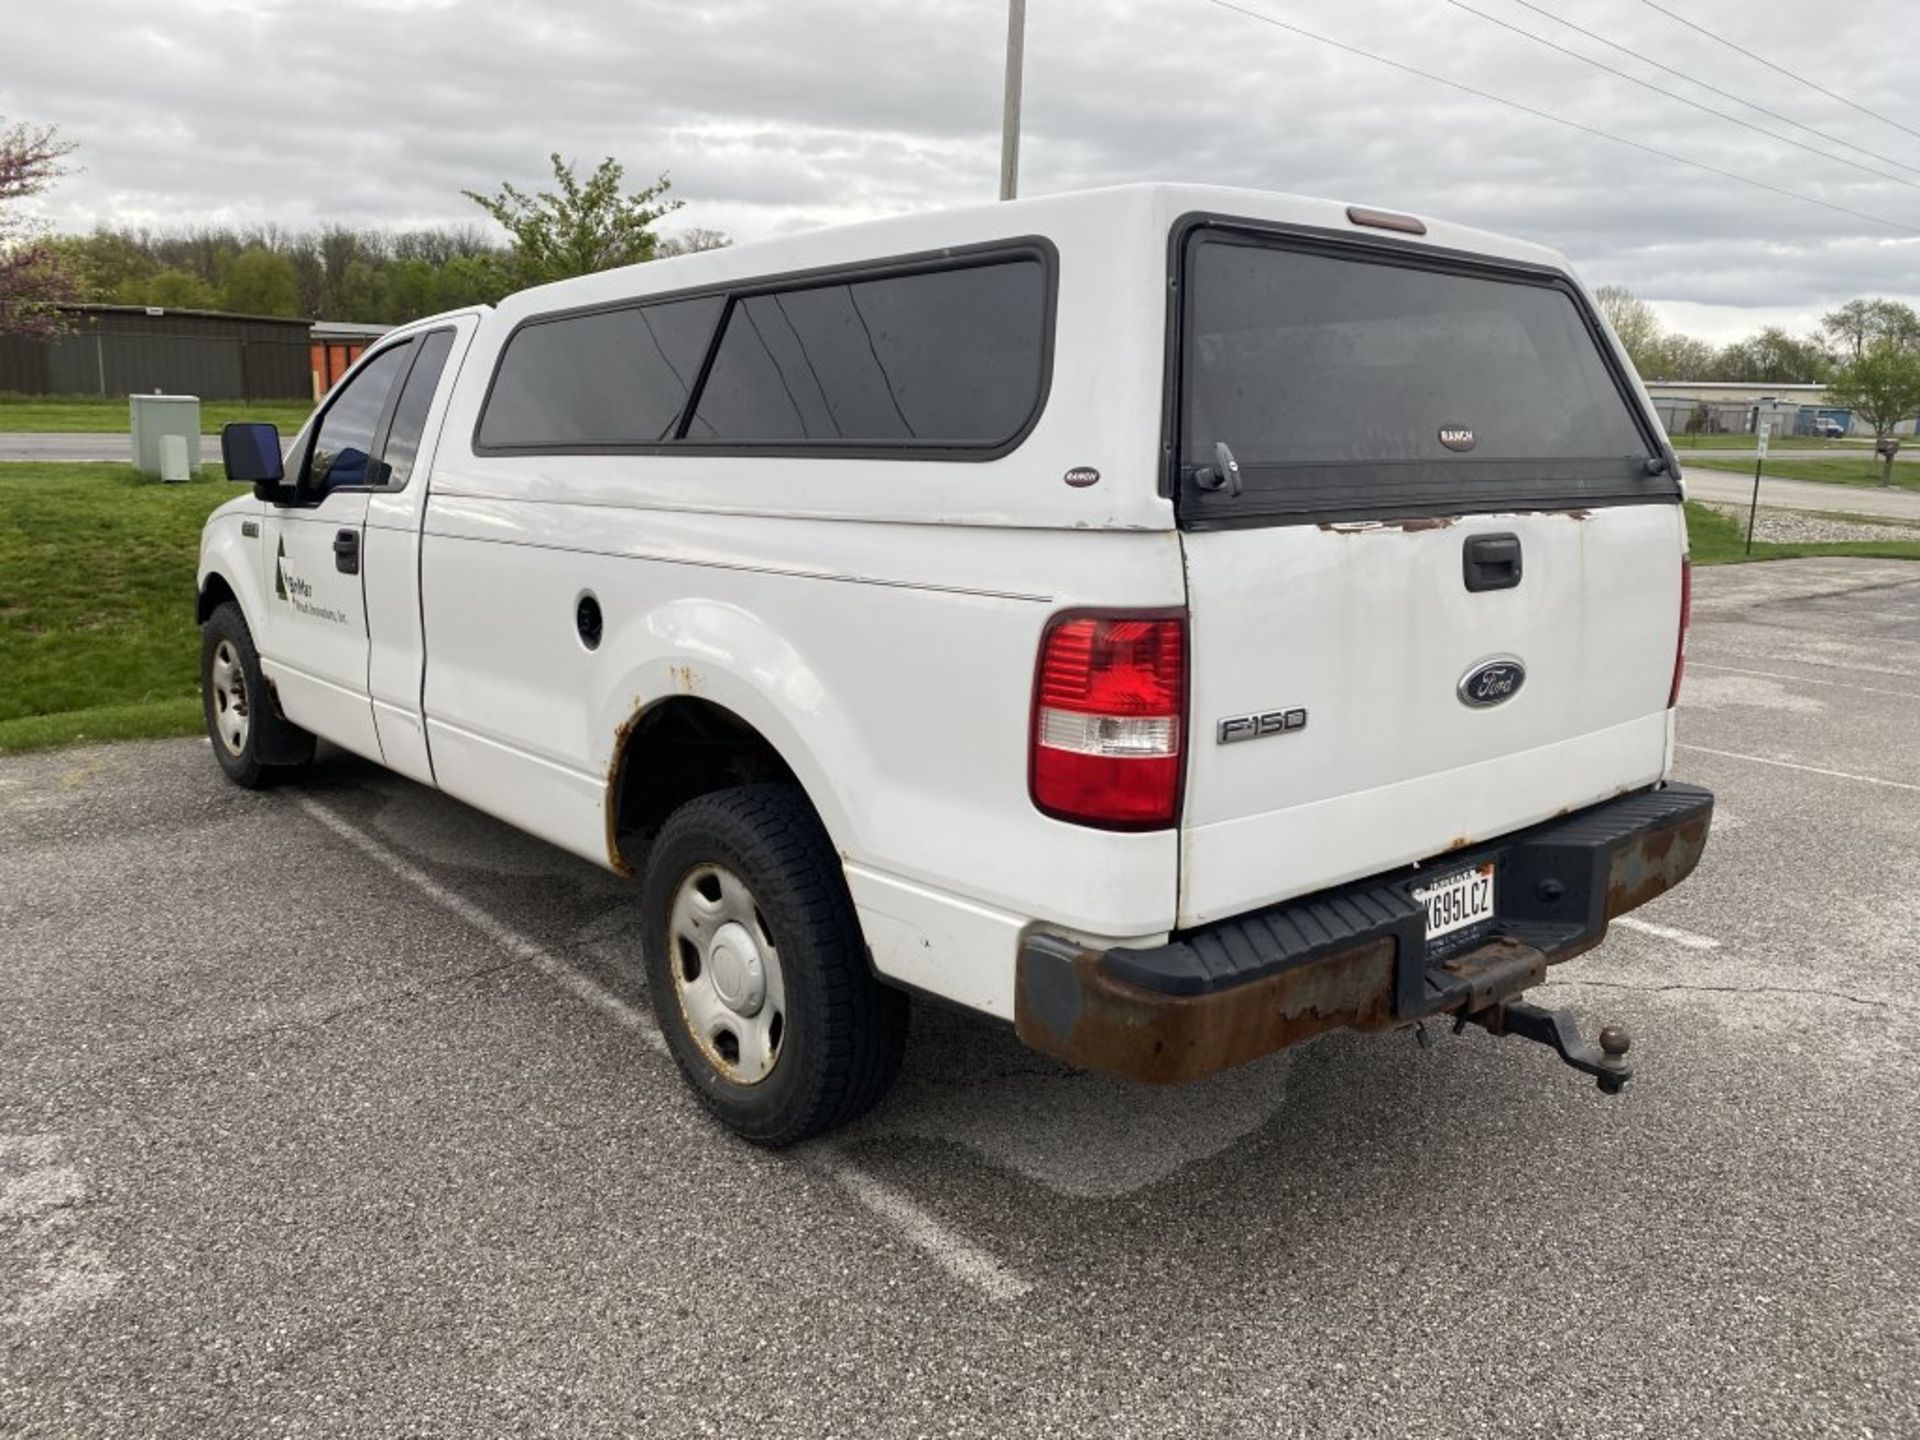 2005 FORD F150 XLT PICKUP TRUCK, EXTENDED CAB, LONG BOX WITH TOPPER, 2WD, AUTO TRANS, AM/FM-CD, - Image 3 of 22